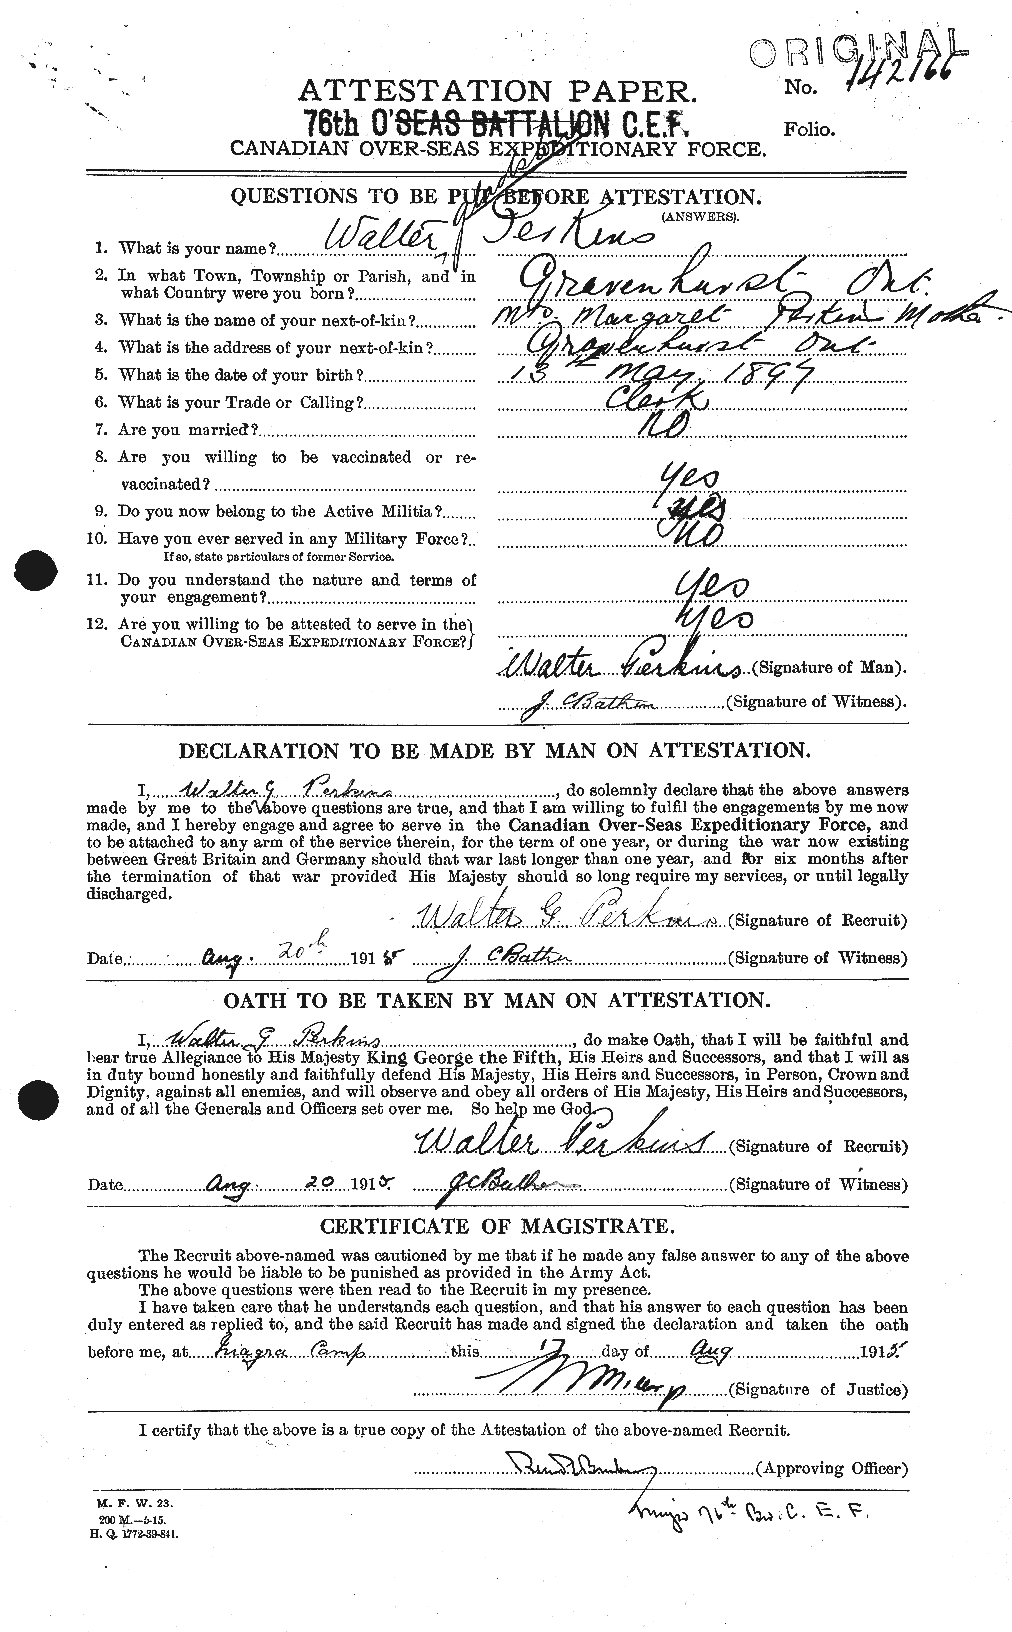 Personnel Records of the First World War - CEF 574075a